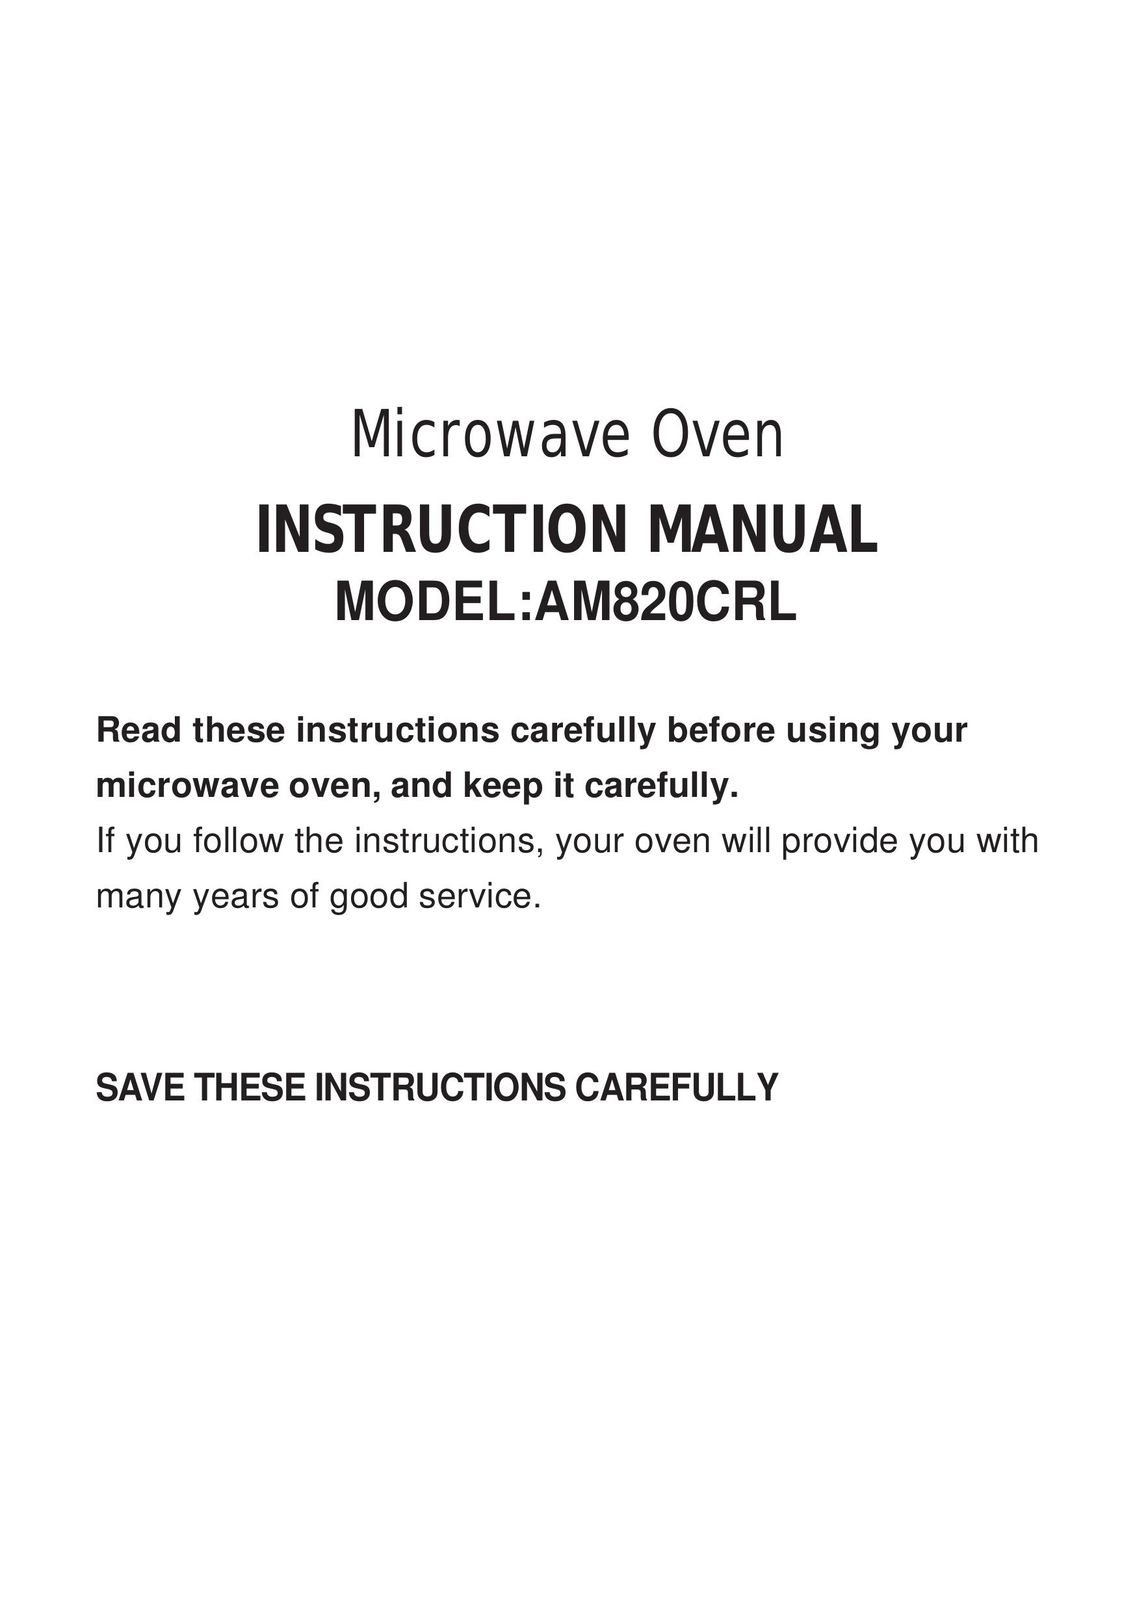 Akai AM820CRL Microwave Oven User Manual (Page 1)